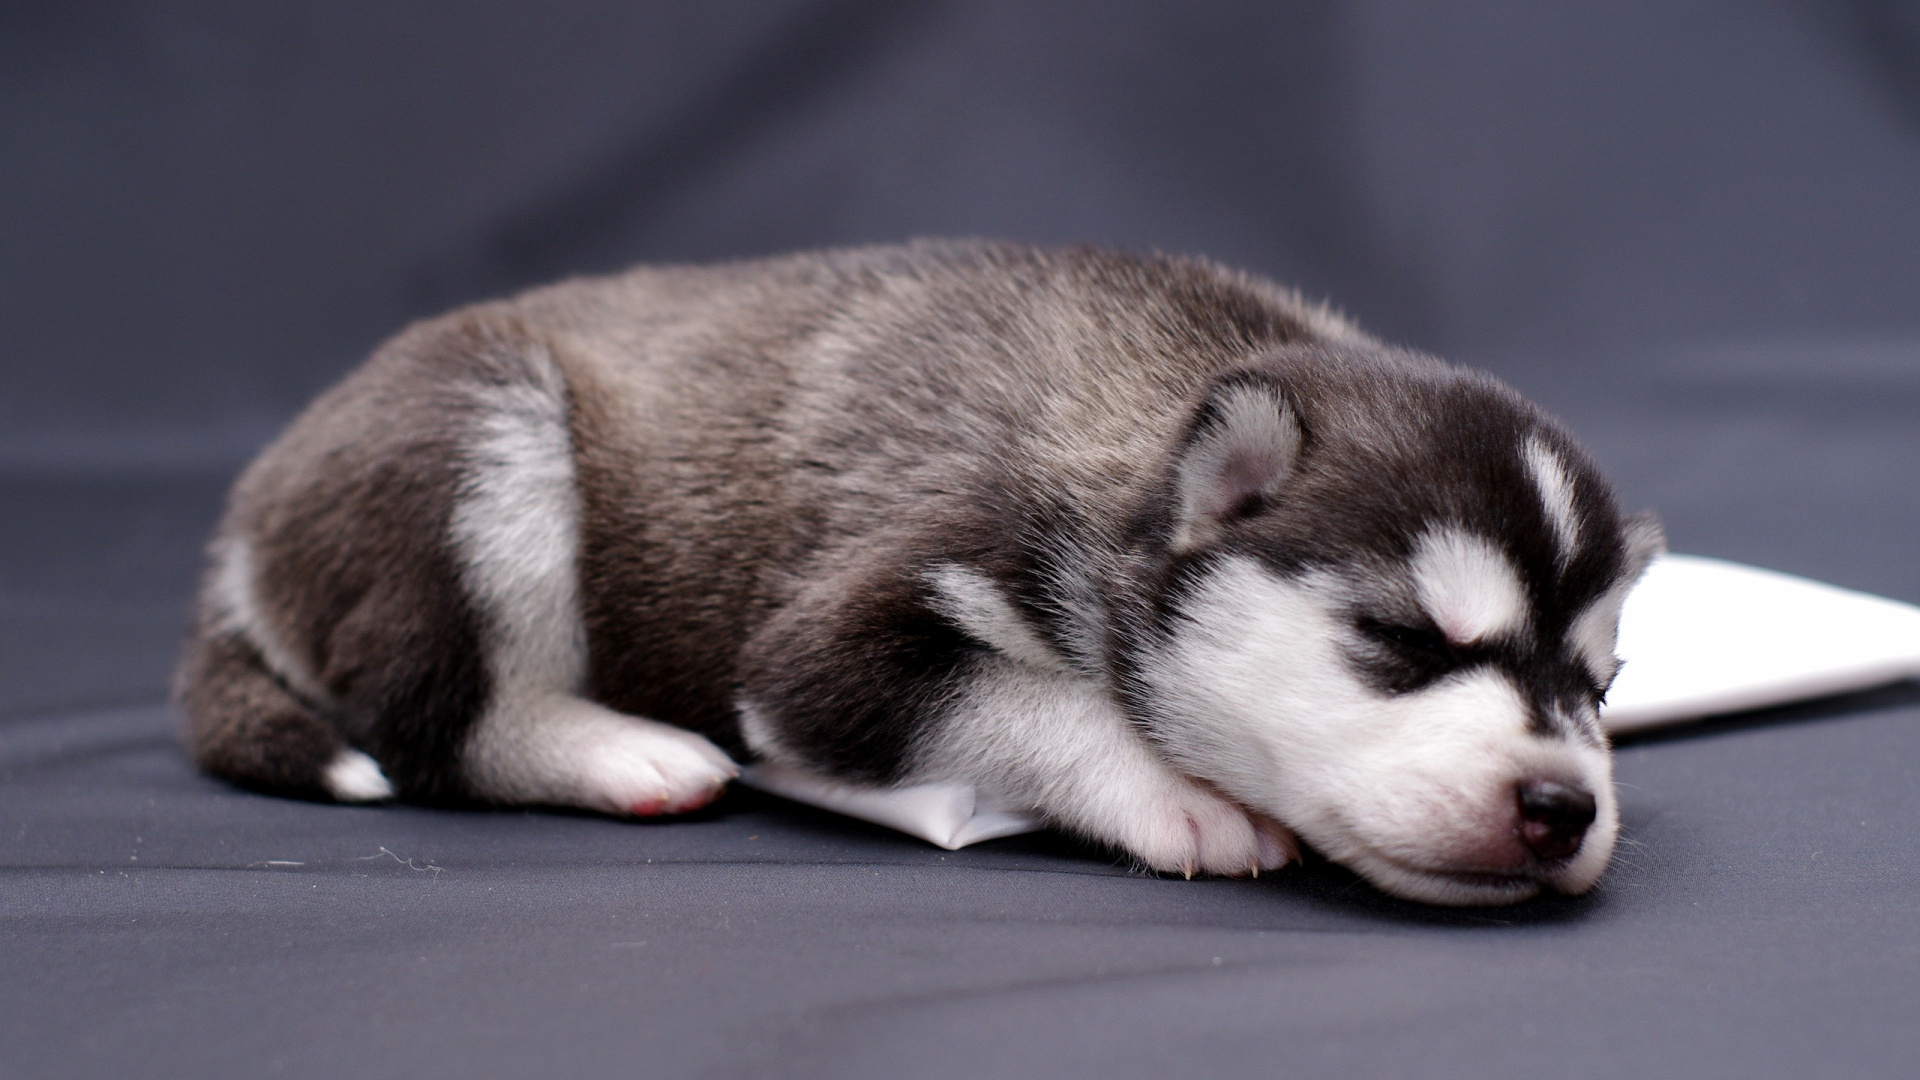 Brown and White Siberian Husky Puppy Lying on Blue Textile. Wallpaper in 1920x1080 Resolution